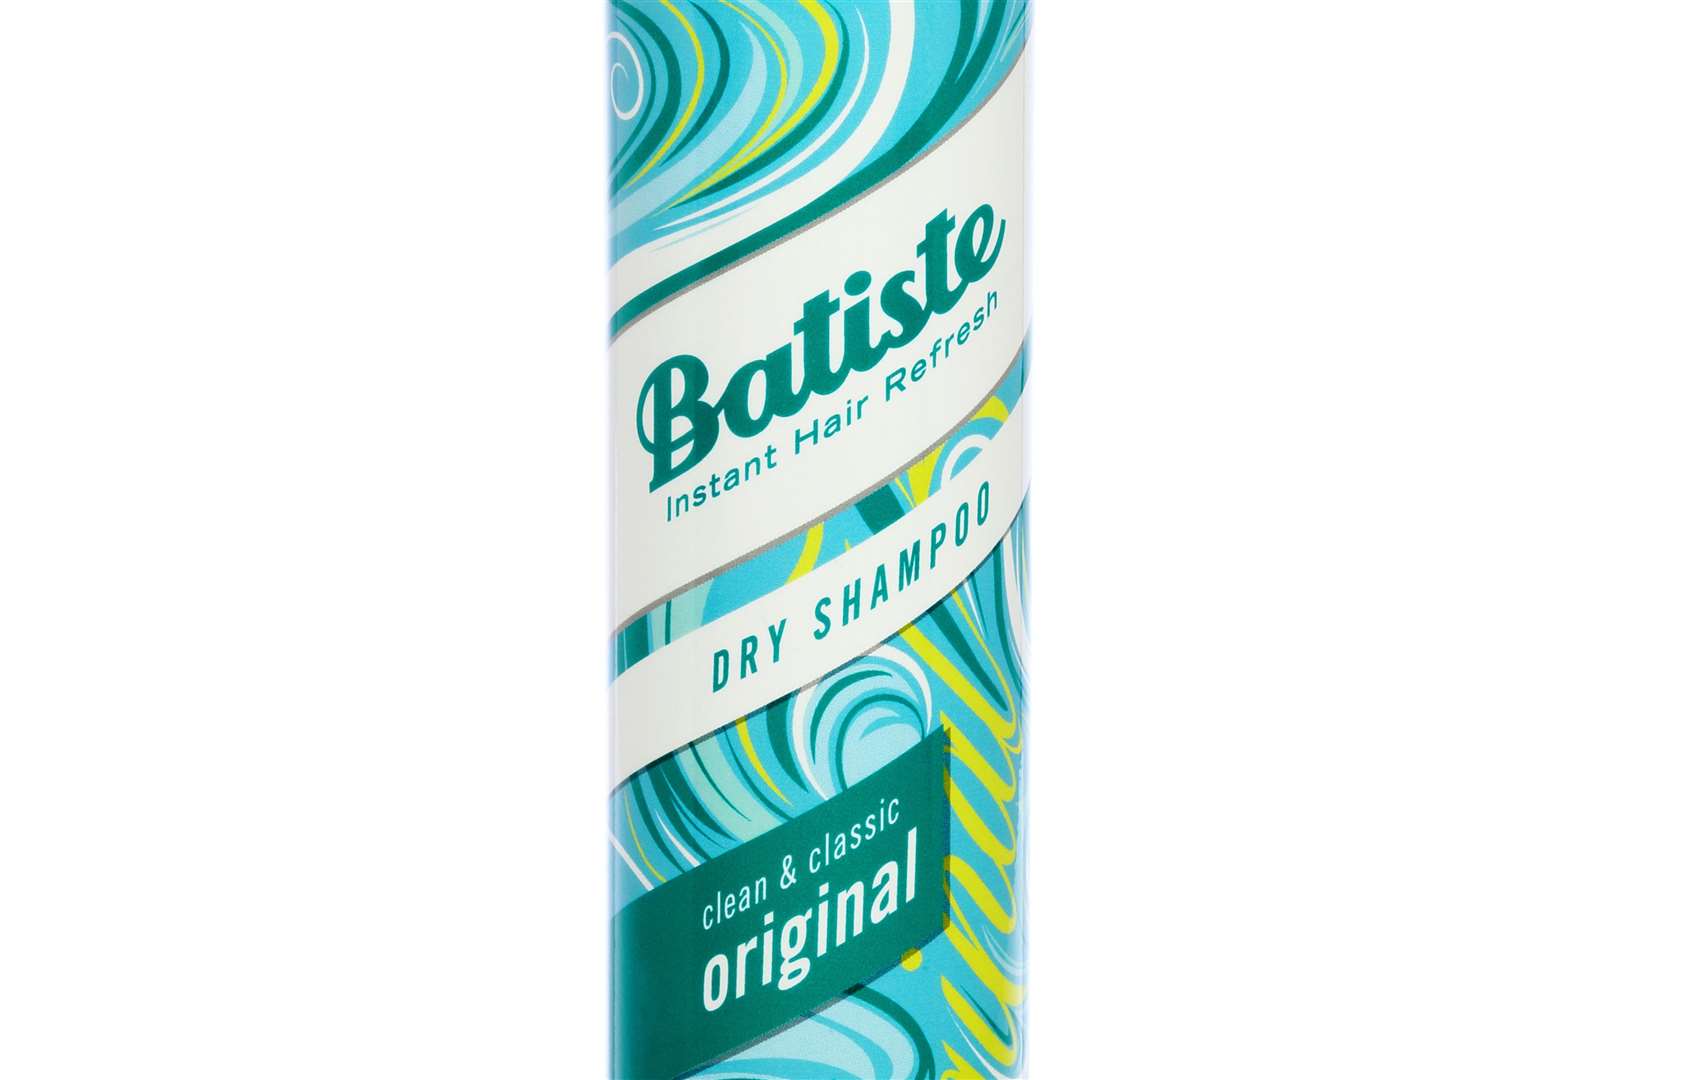 Batiste dry shampoo is made at the Church & Dwight factory in Folkestone. Photographer: Alan Duncan (10815543)